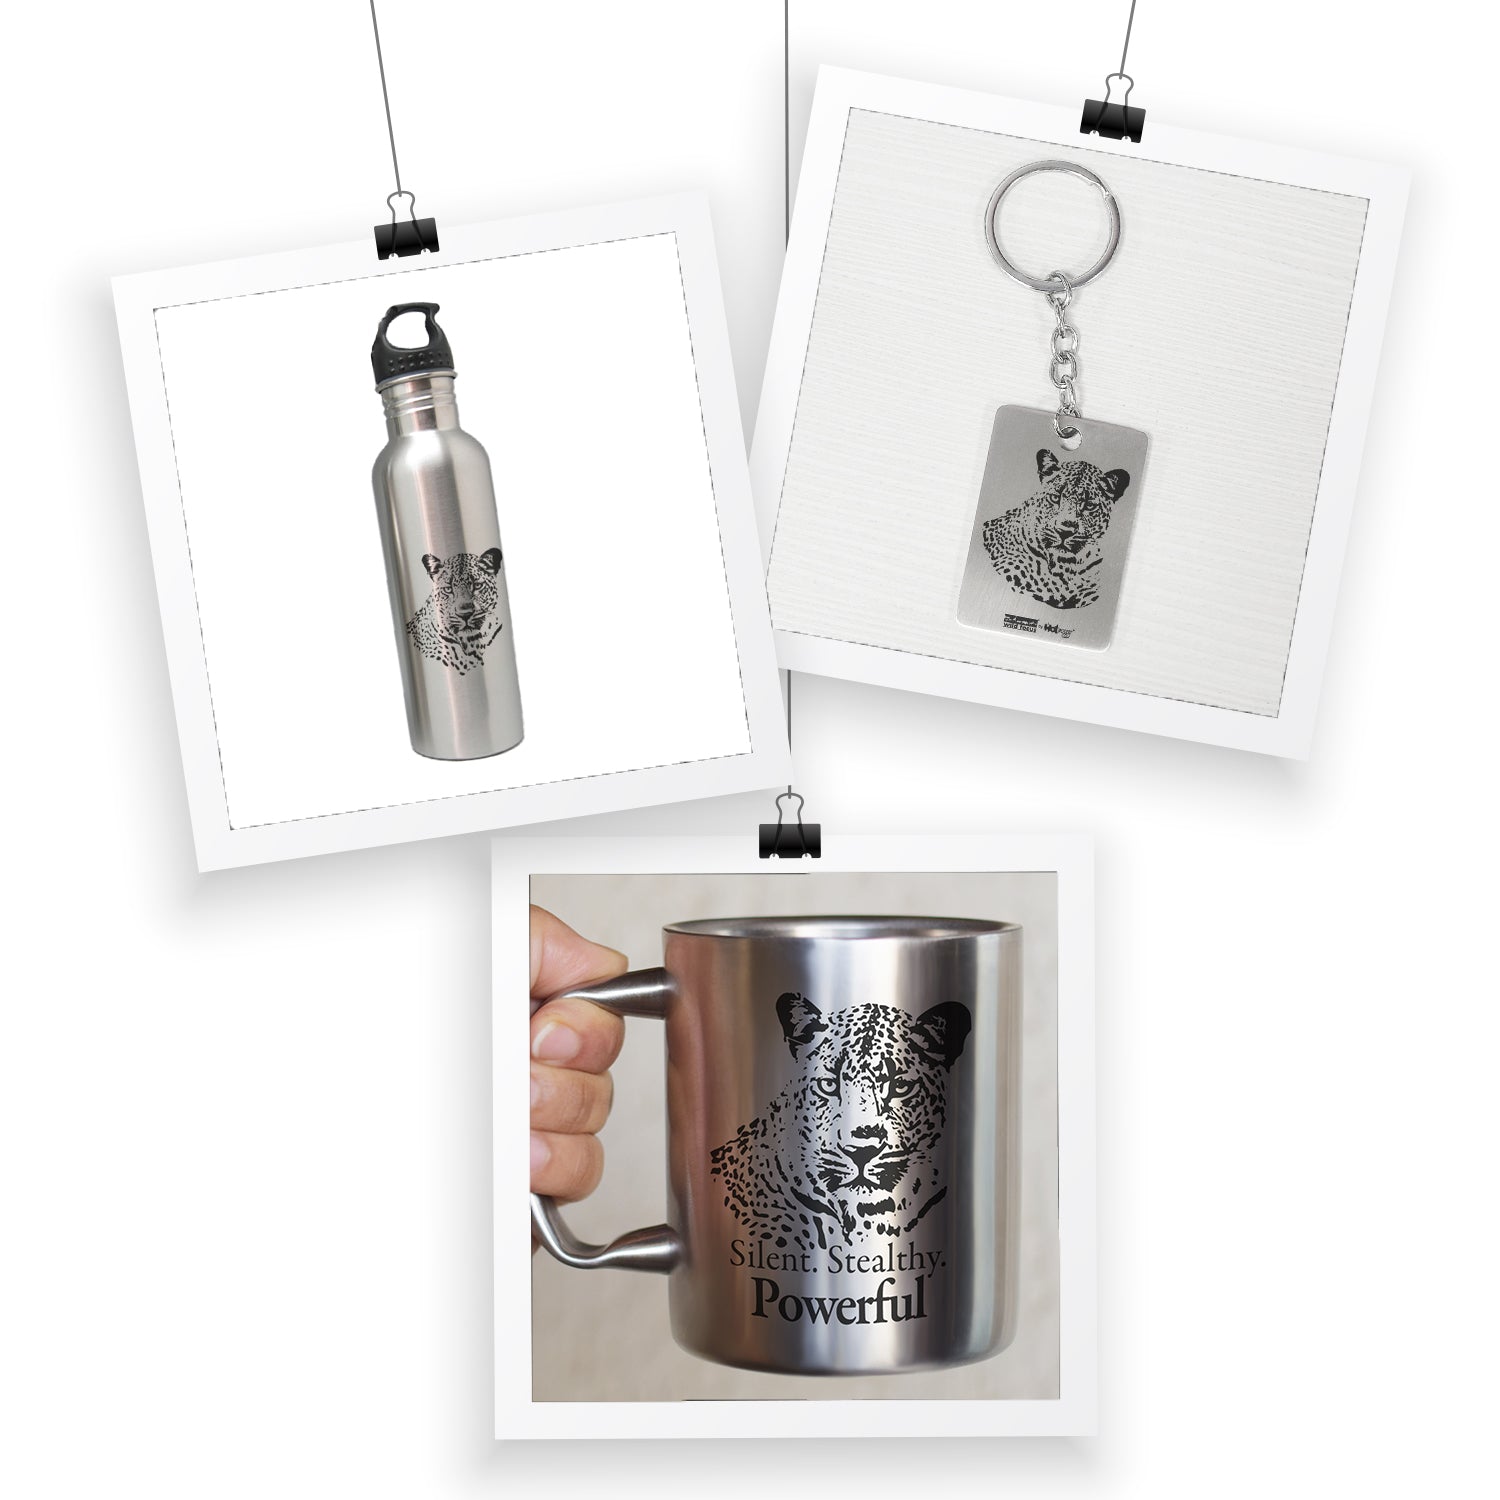 Silent, Stealthy and Powerful Leopard - A Perfect Mug Bottle Everyday Drinkware Combo with Keychain (1 Mug, 1 Bottle, 1 Keychain)